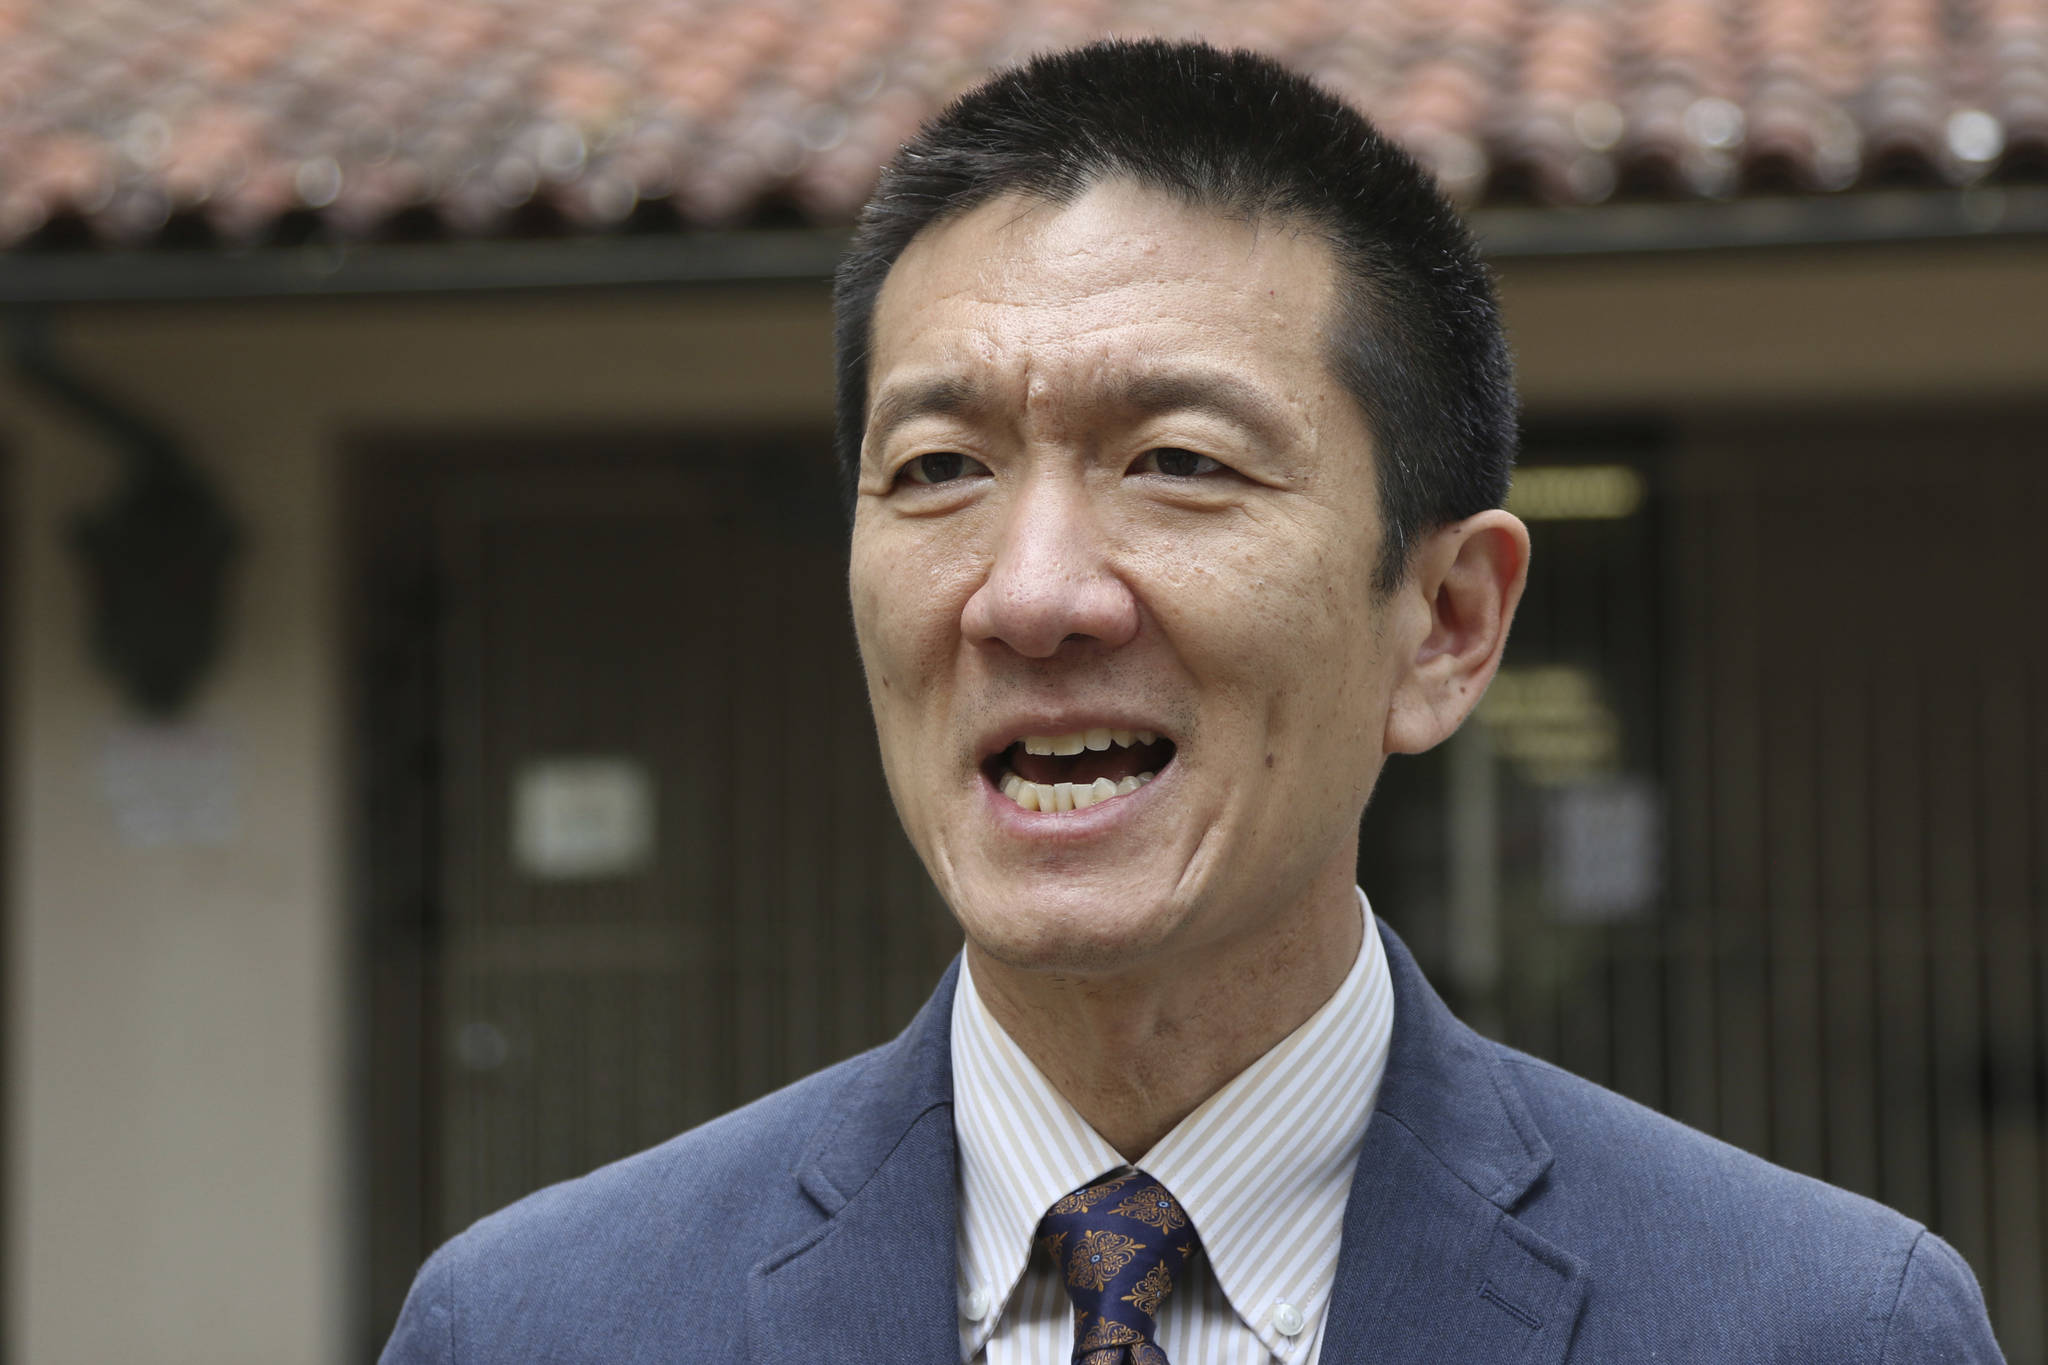 Hawaii Attorney General Douglas Chin speaks to The Associated Press in Honolulu on Oct. 17 about Hawaii’s lawsuit challenging President Donald Trump’s travel ban. (Caleb Jones/The Associated Press)